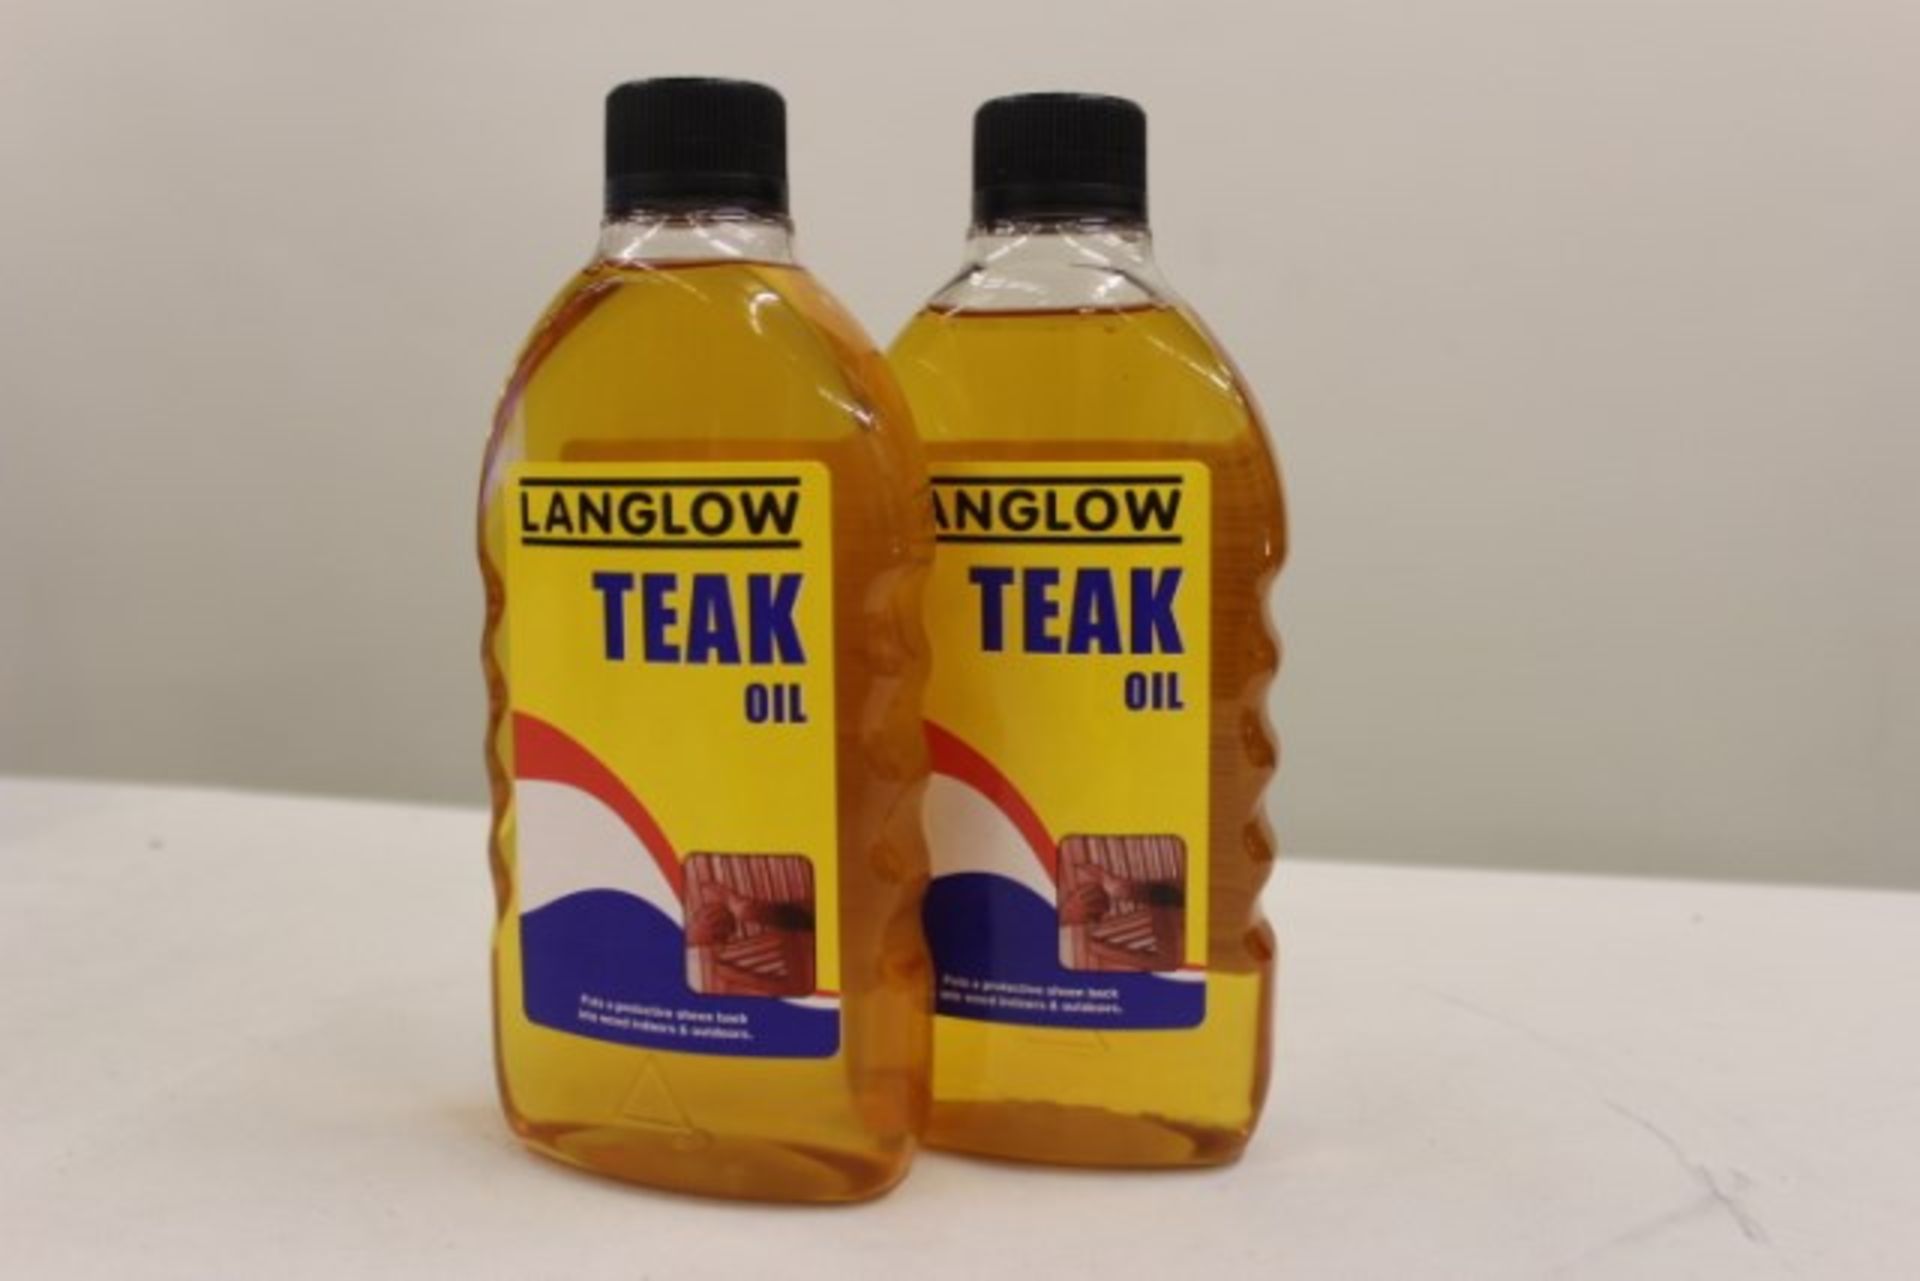 V *TRADE QTY* Grade A Two Bottles 500ml Teak oil X 6 YOUR BID PRICE TO BE MULTIPLIED BY SIX